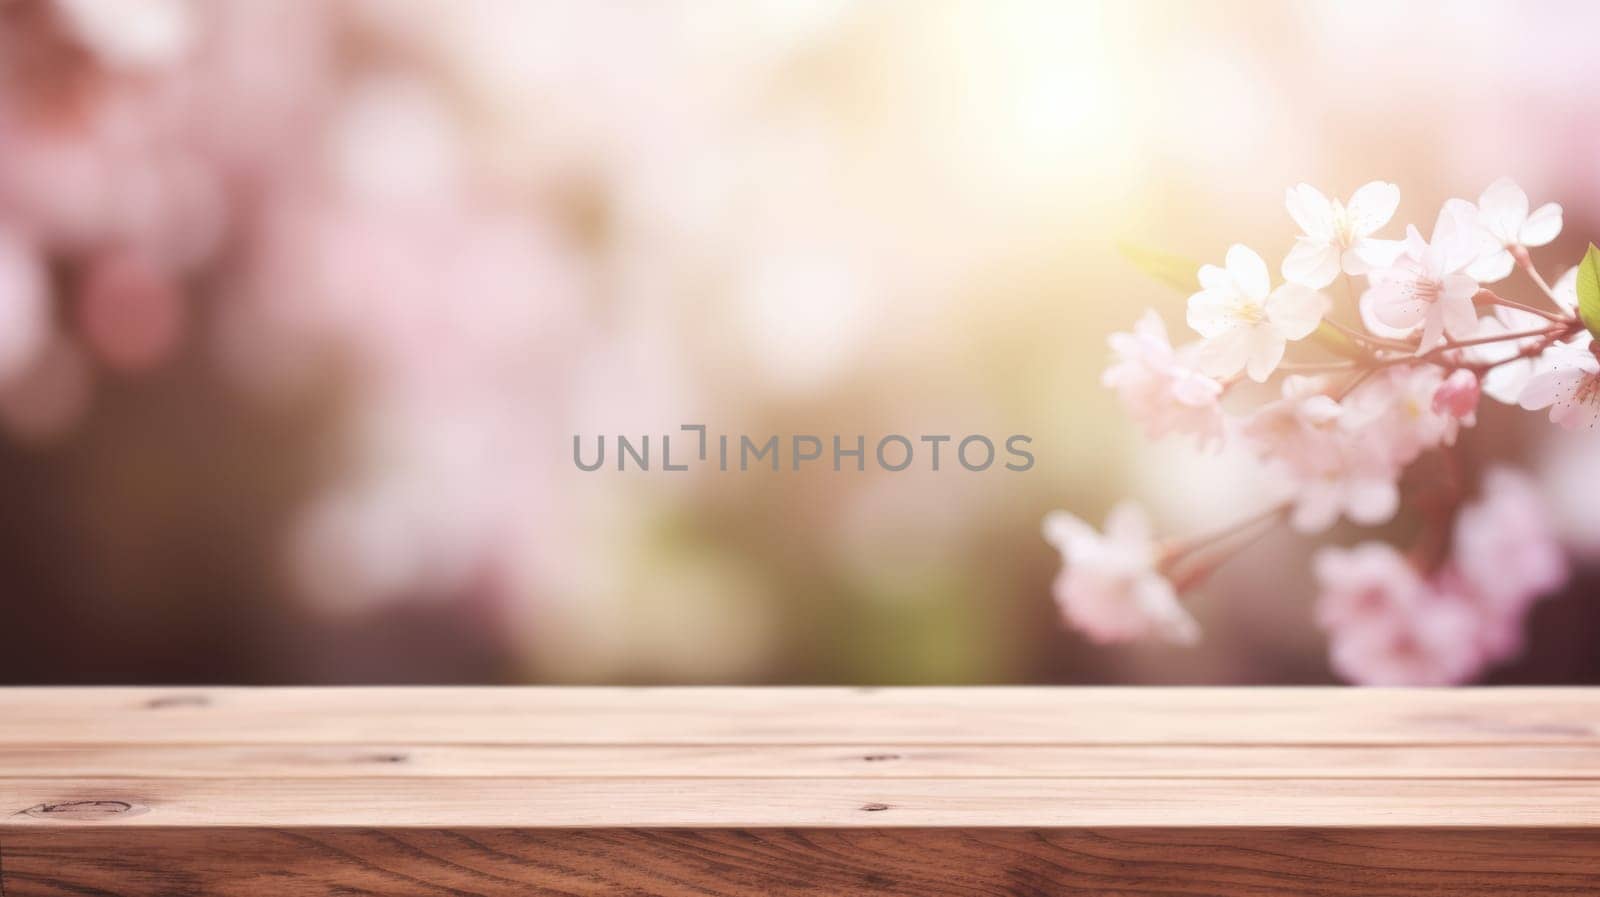 Wooden board empty table background. Abstract blurred spring nature background by natali_brill